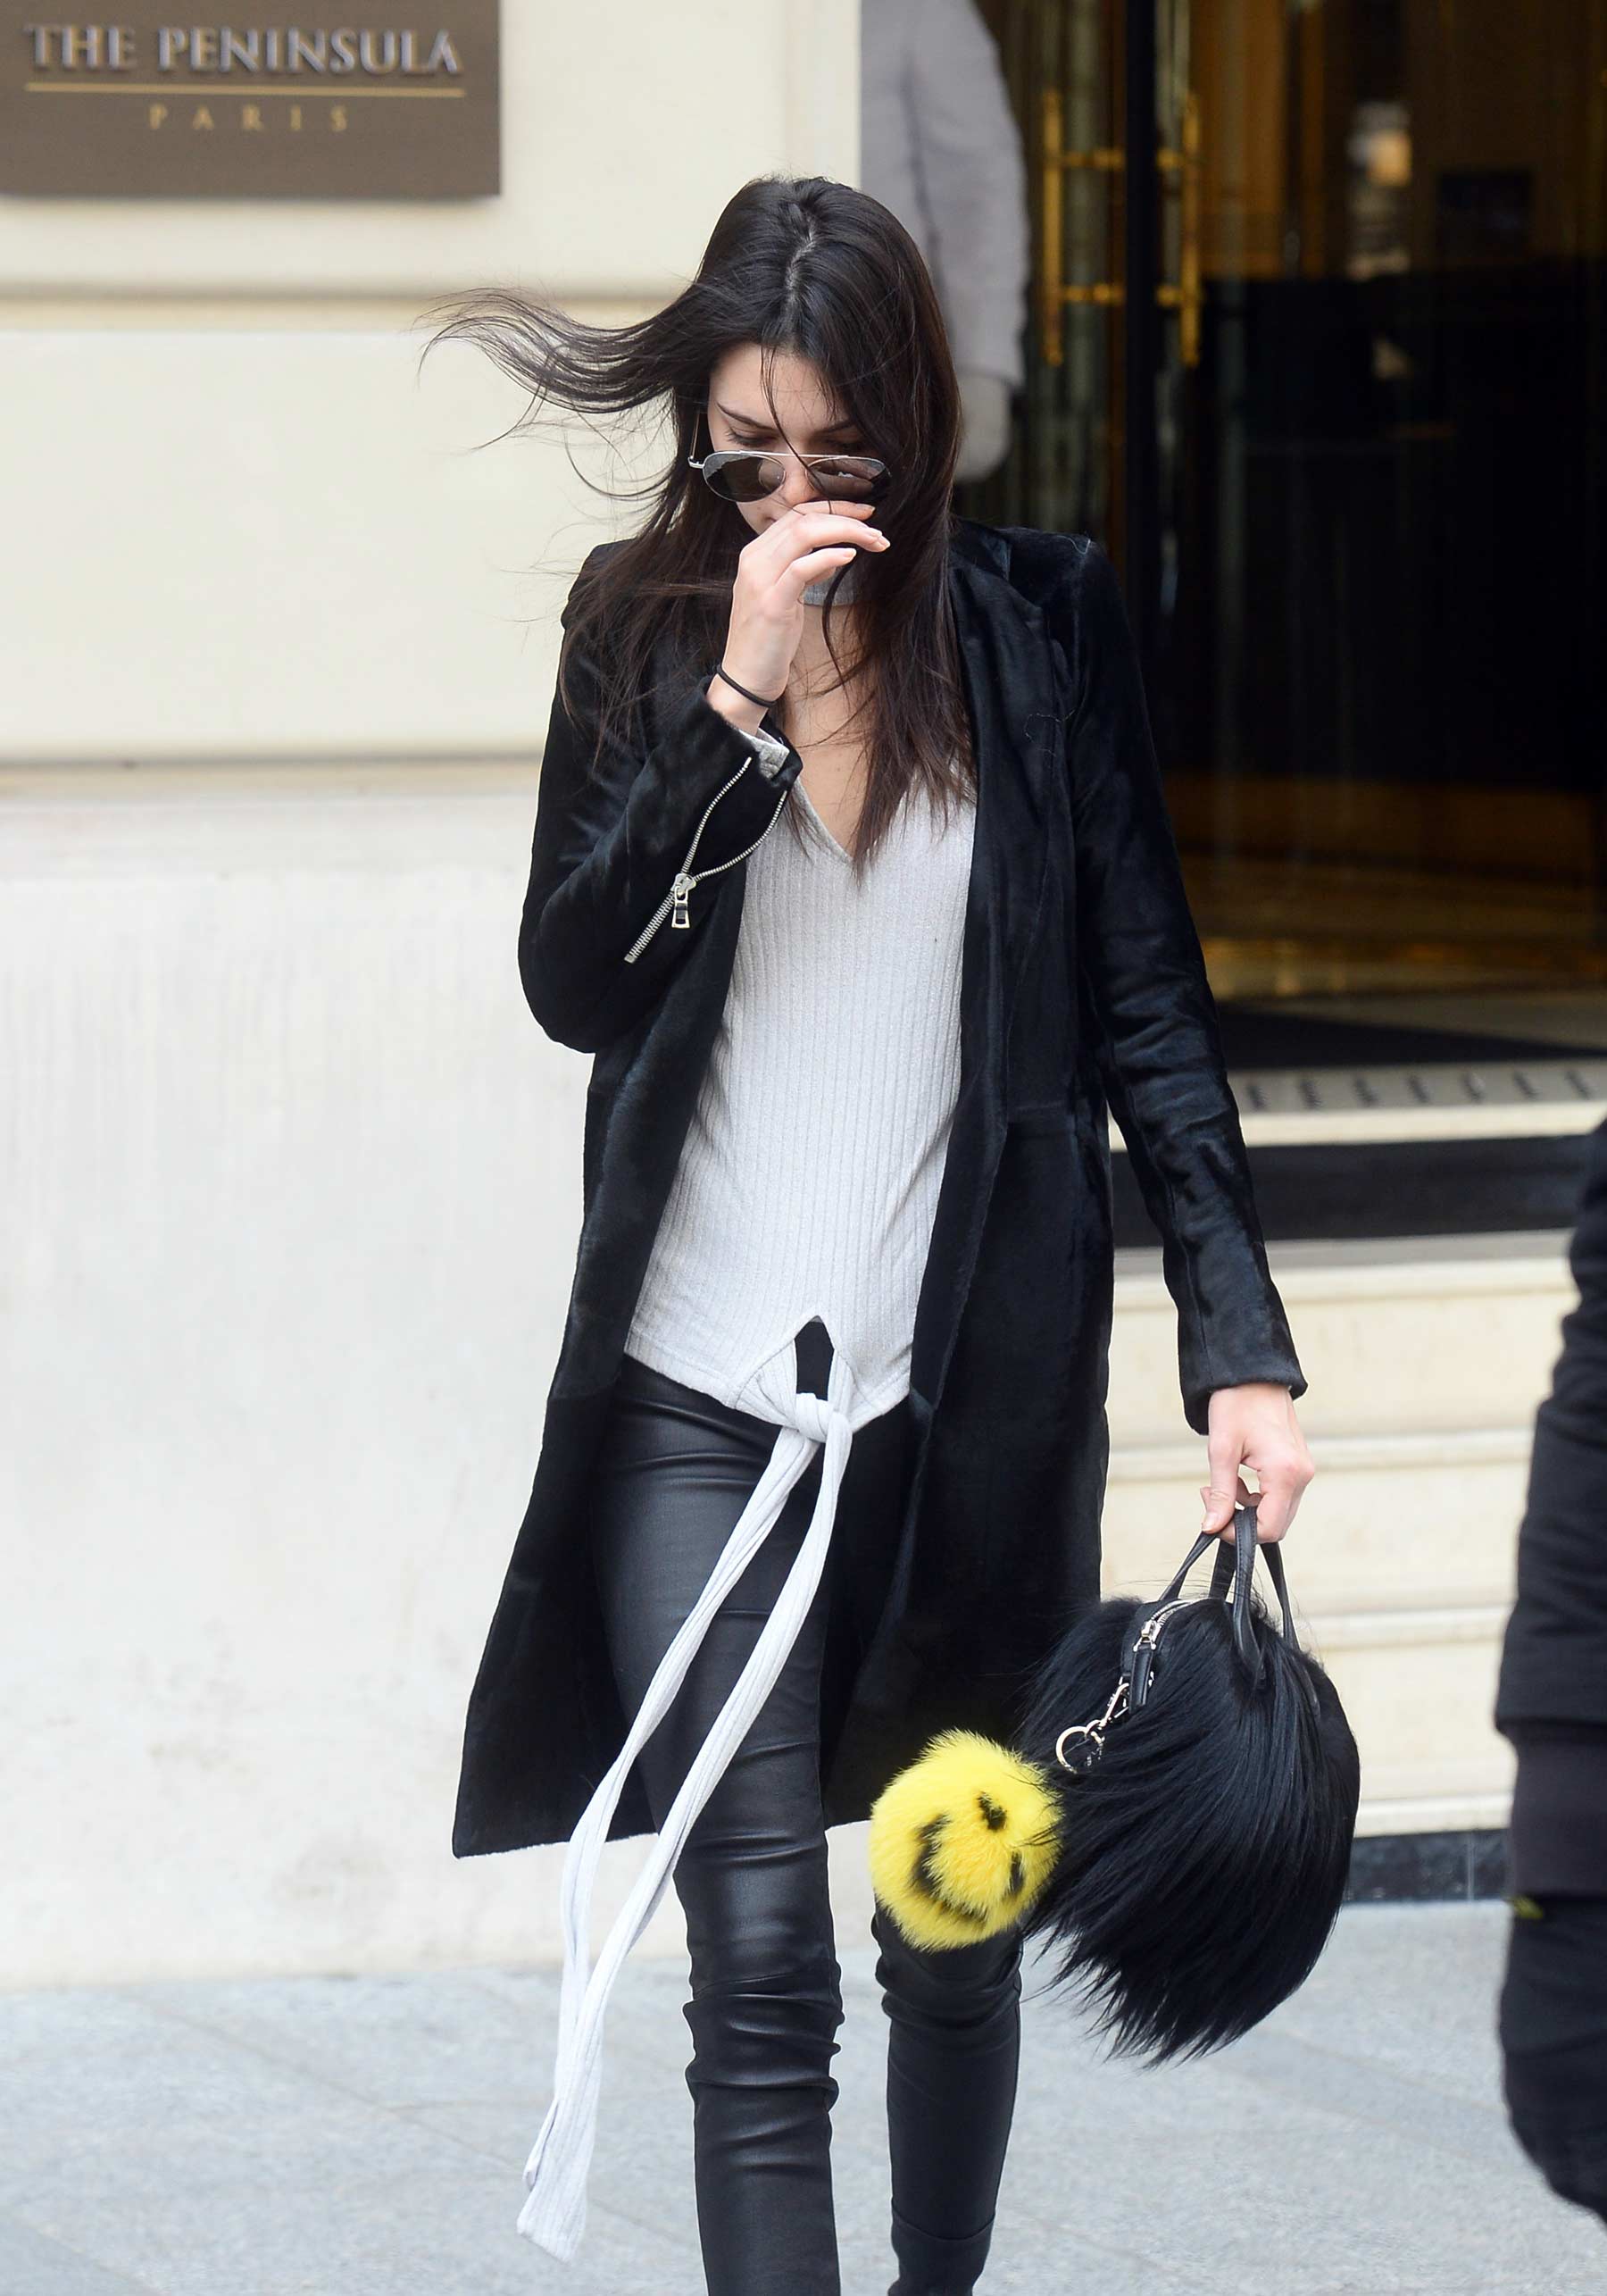 Kendall Jenner out in Paris